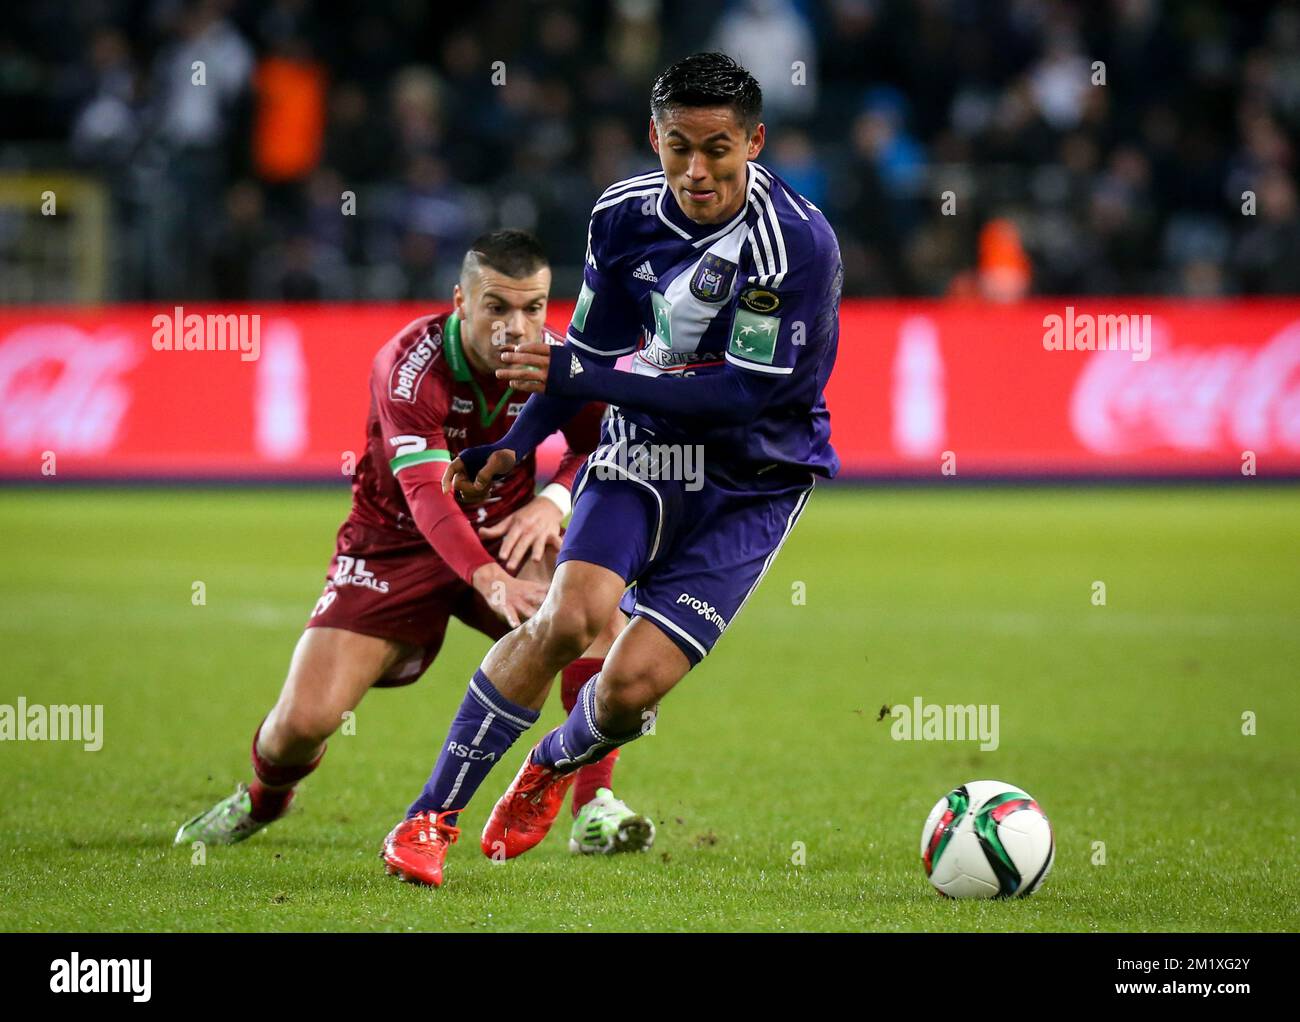 20150201 - BRUSSELS, BELGIUM: Essevee's Alessandro Cordaro and Anderlecht's Andy Najar fight for the ball during the Jupiler Pro League match between RSC Anderlecht and SV Zulte Waregem, in Brussels, Sunday 01 February 2015, on day 24 of the Belgian soccer championship. BELGA PHOTO VIRGINIE LEFOUR Stock Photo